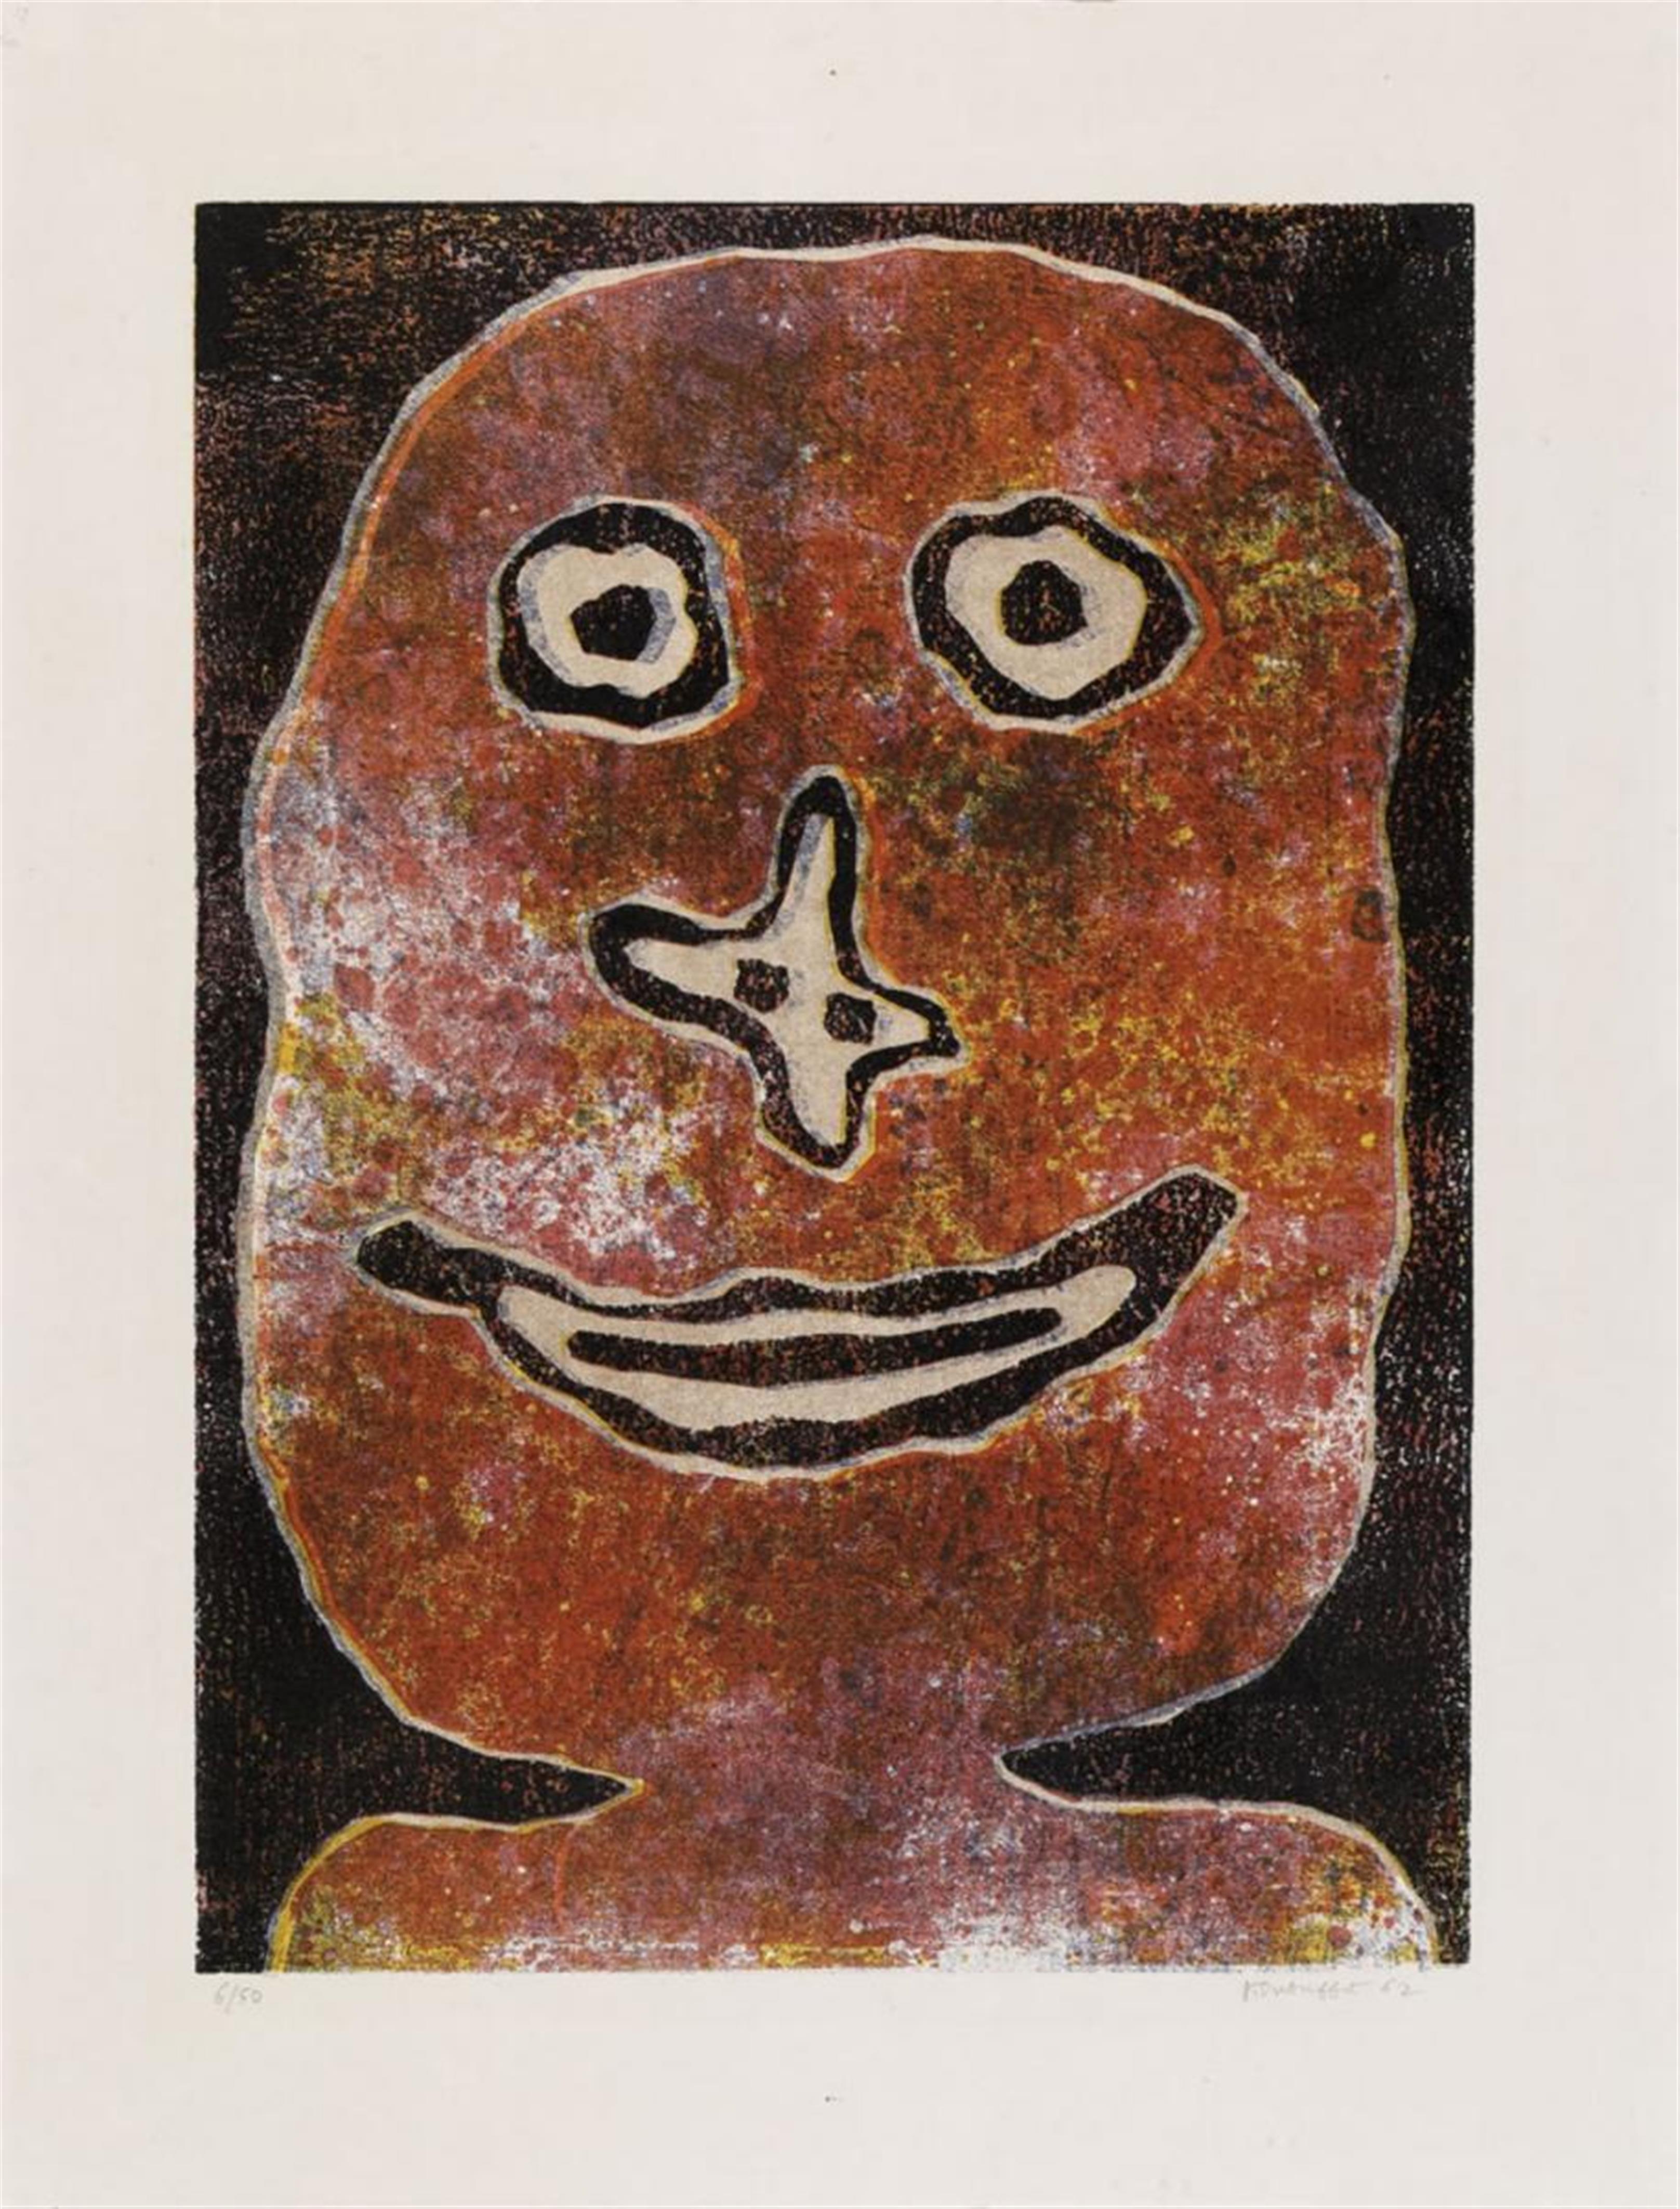 JEAN DUBUFFET - Sourire - image-1